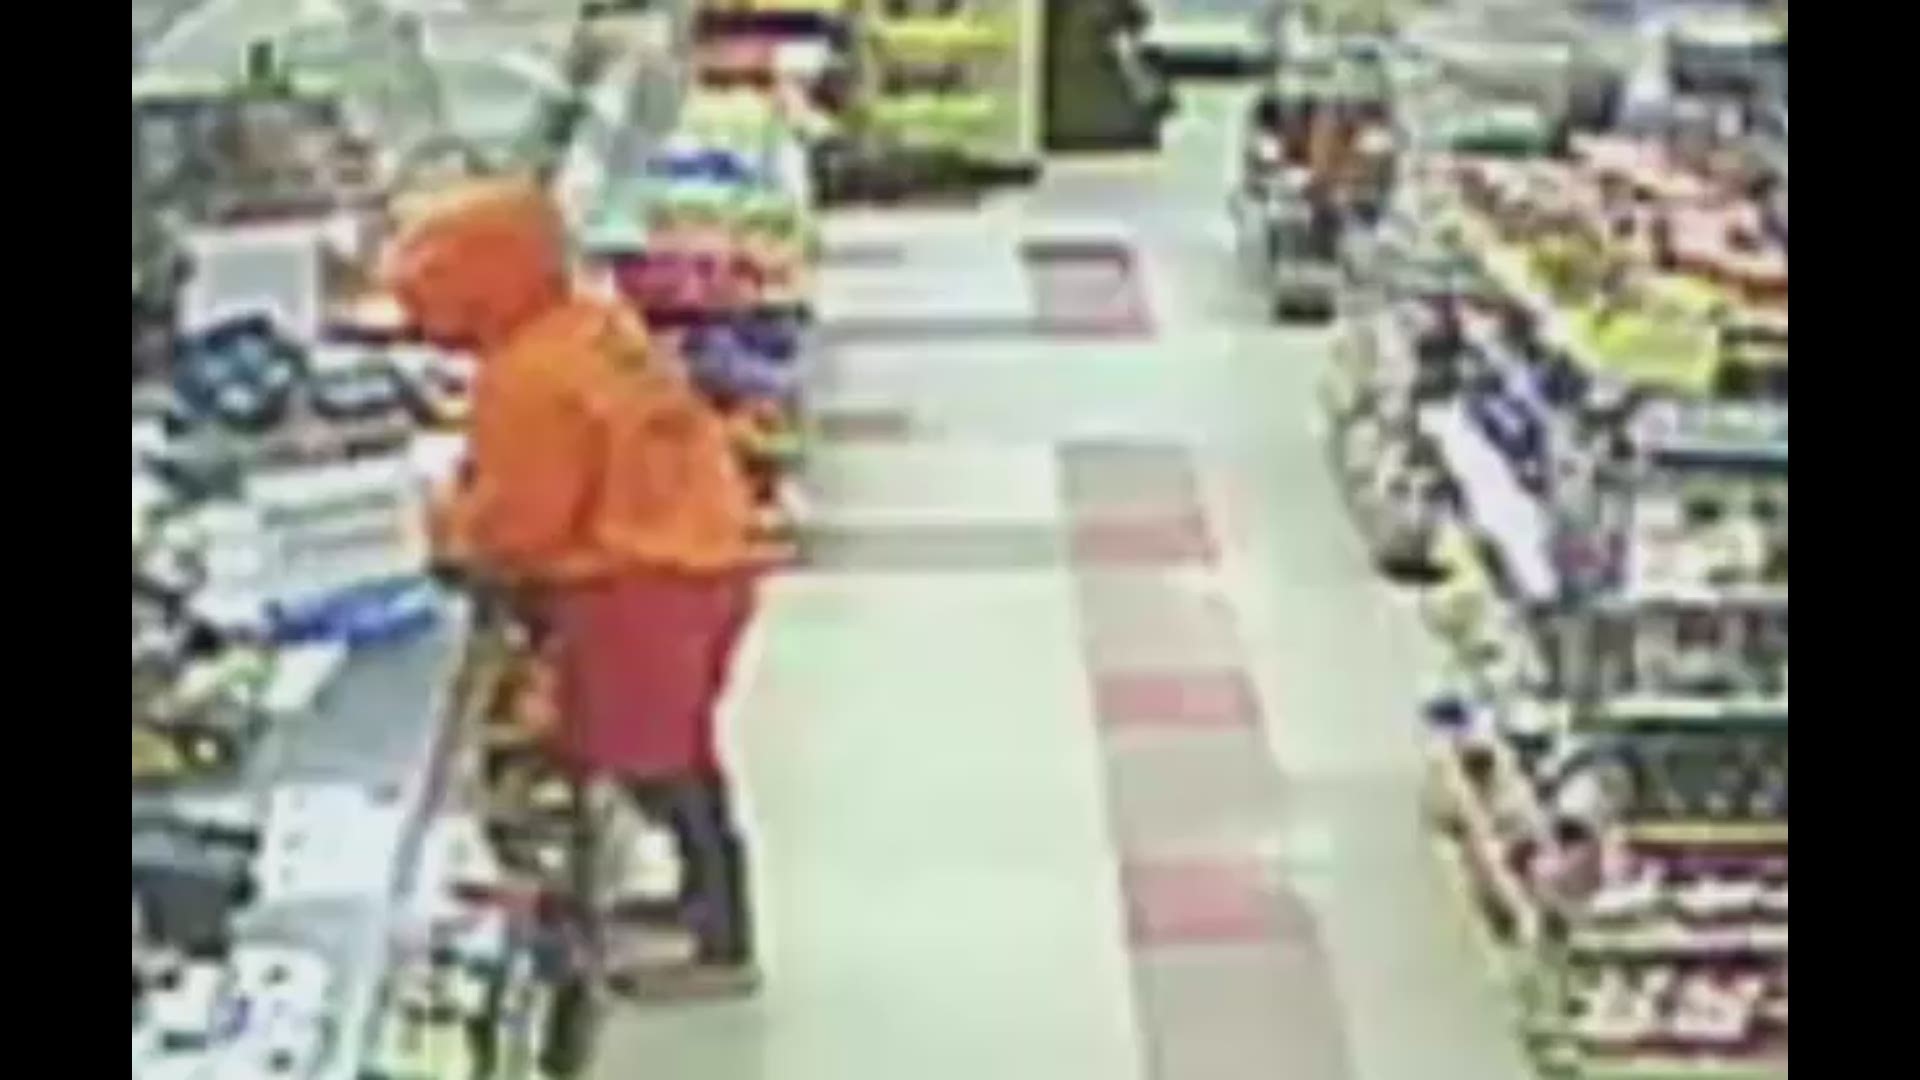 7-Eleven Robbery on Sept. 21, 2018